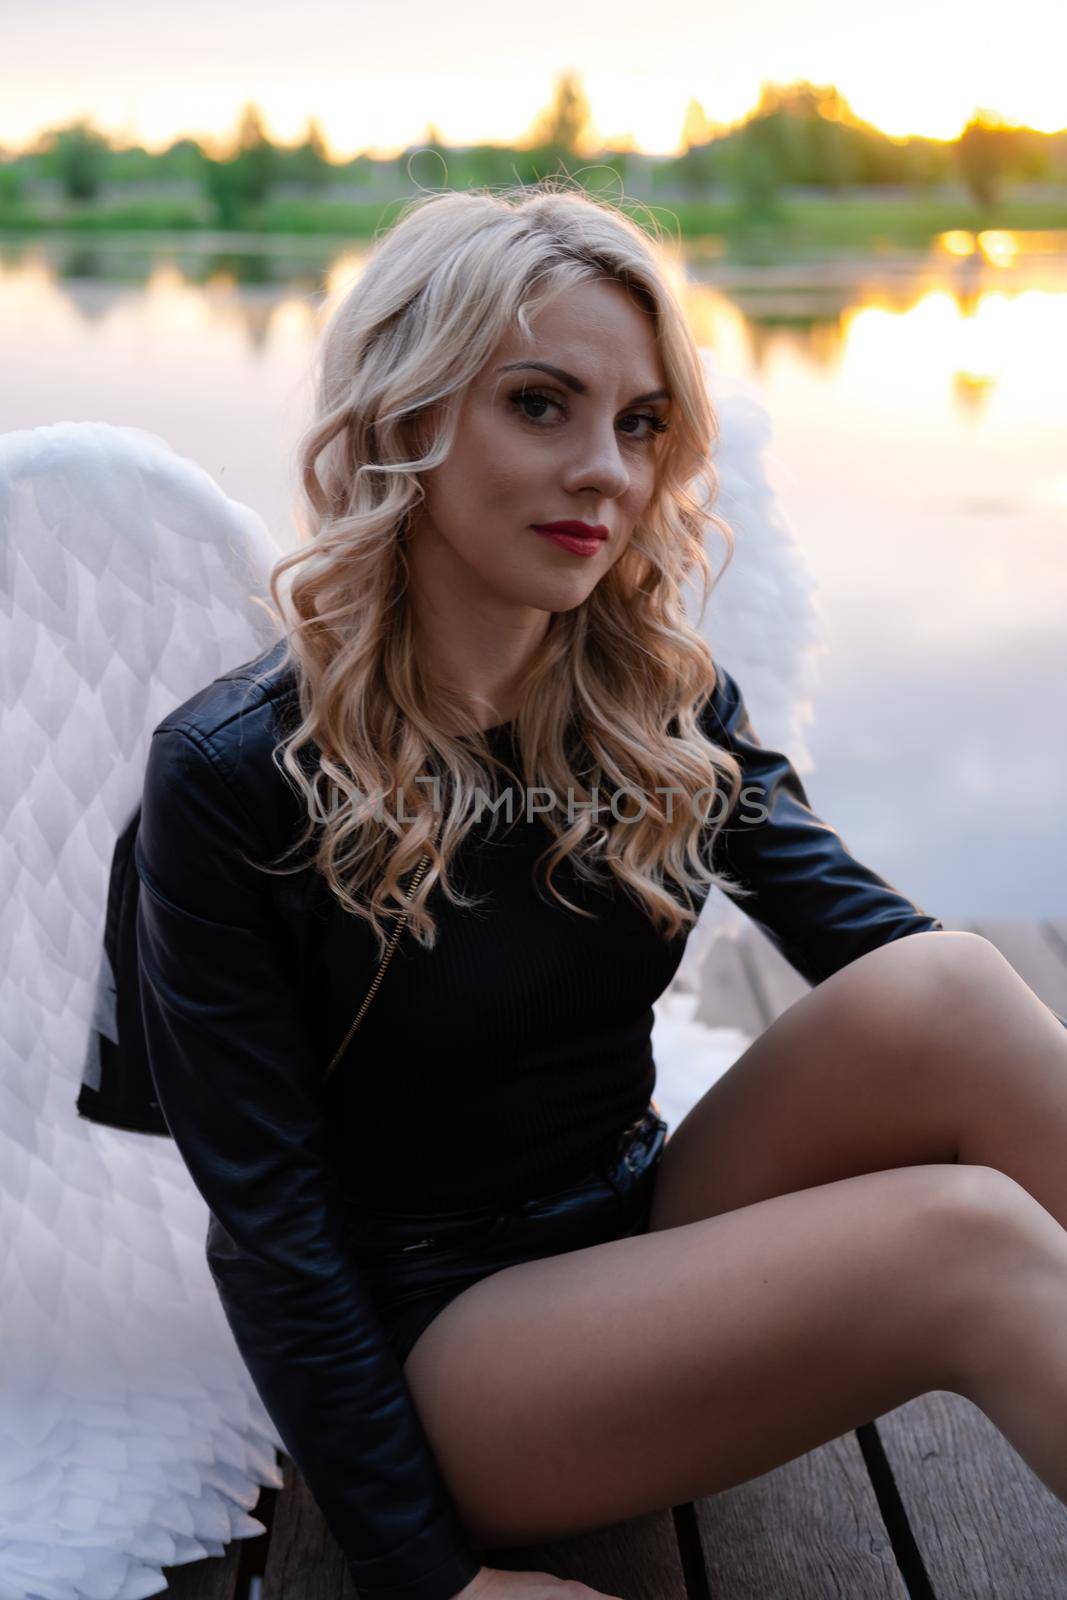 dark angel. blonde sexy woman in black leather clothes with white angels wings.